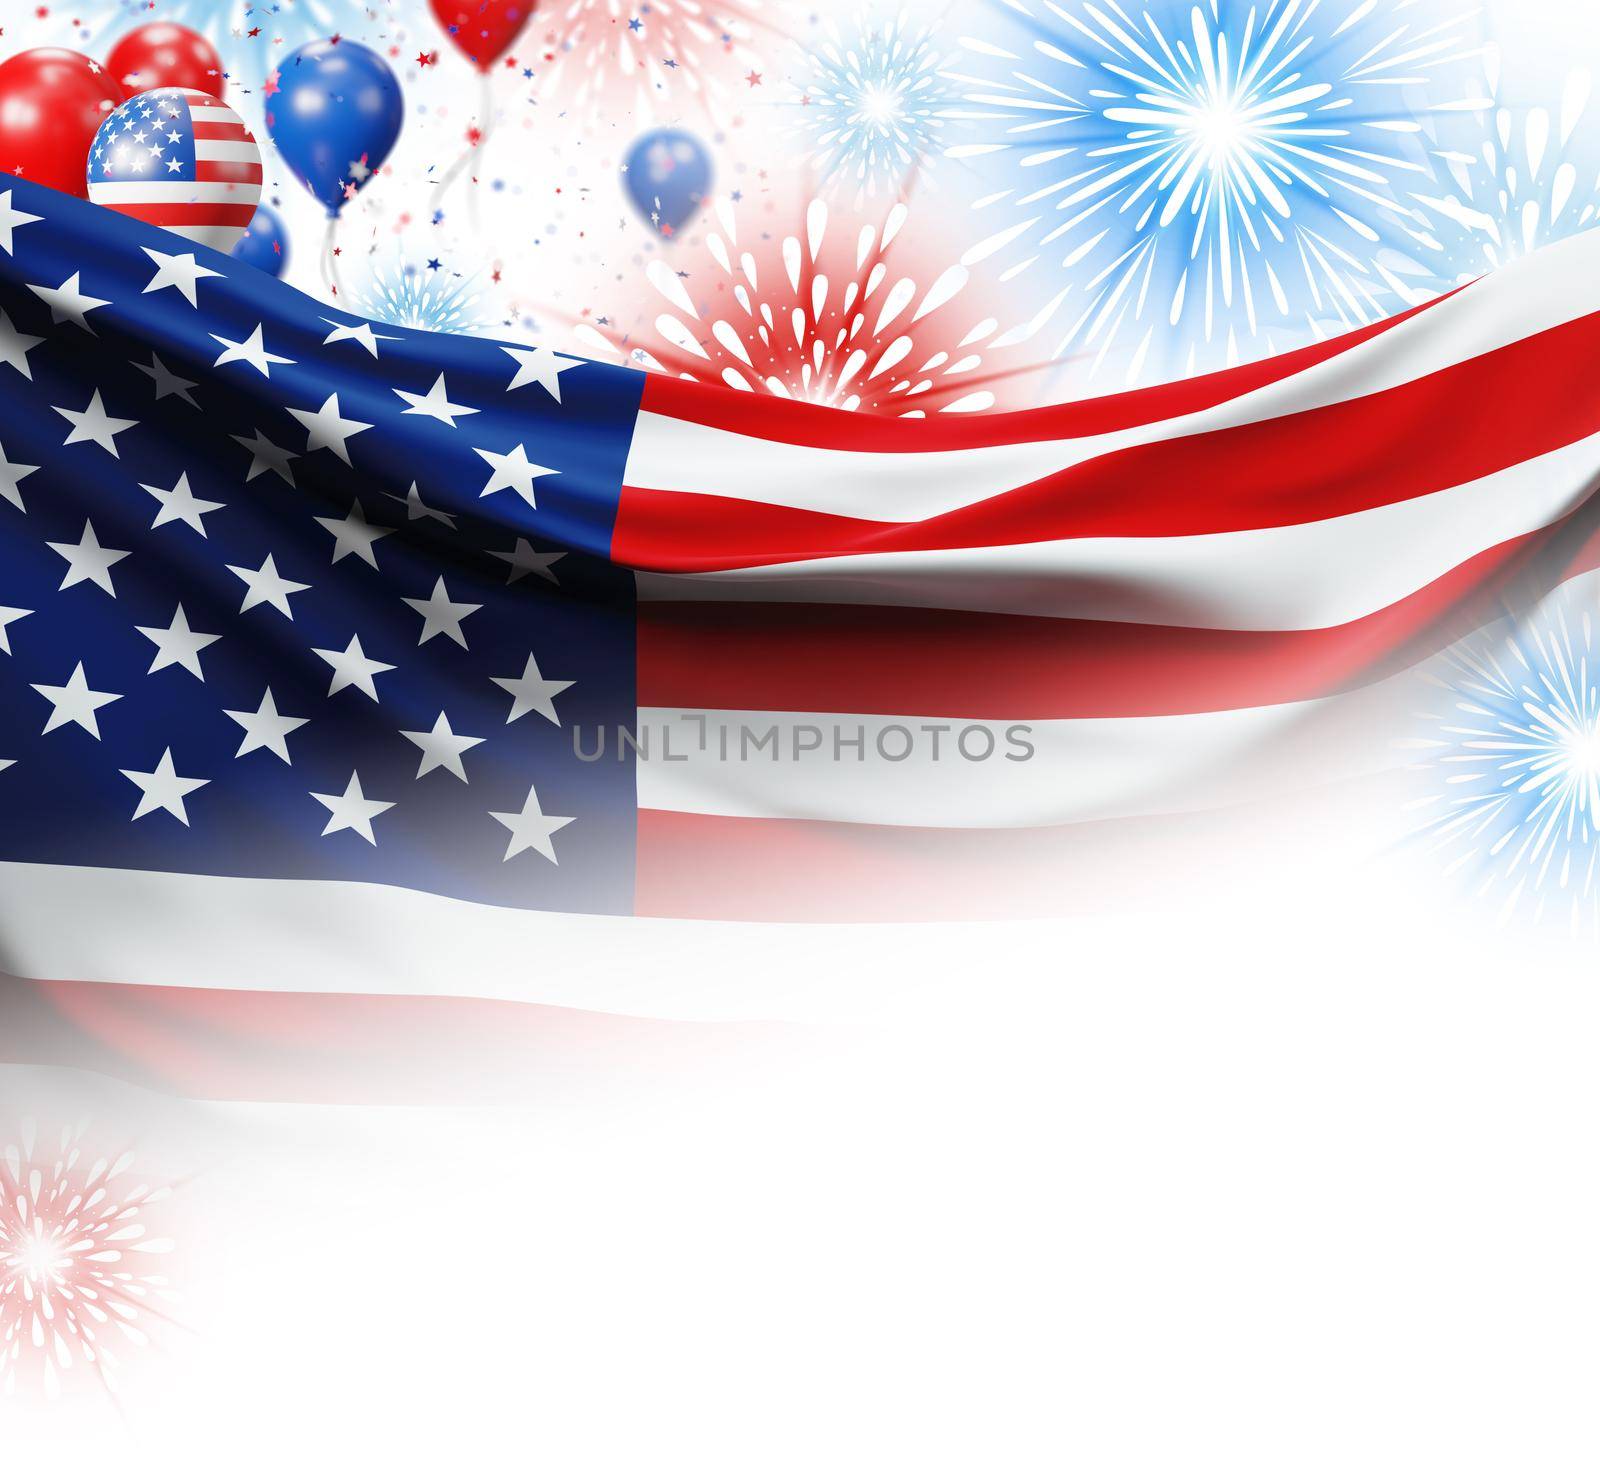 4th of july usa independence day banner design of American flag and balloon with fireworks 3D render